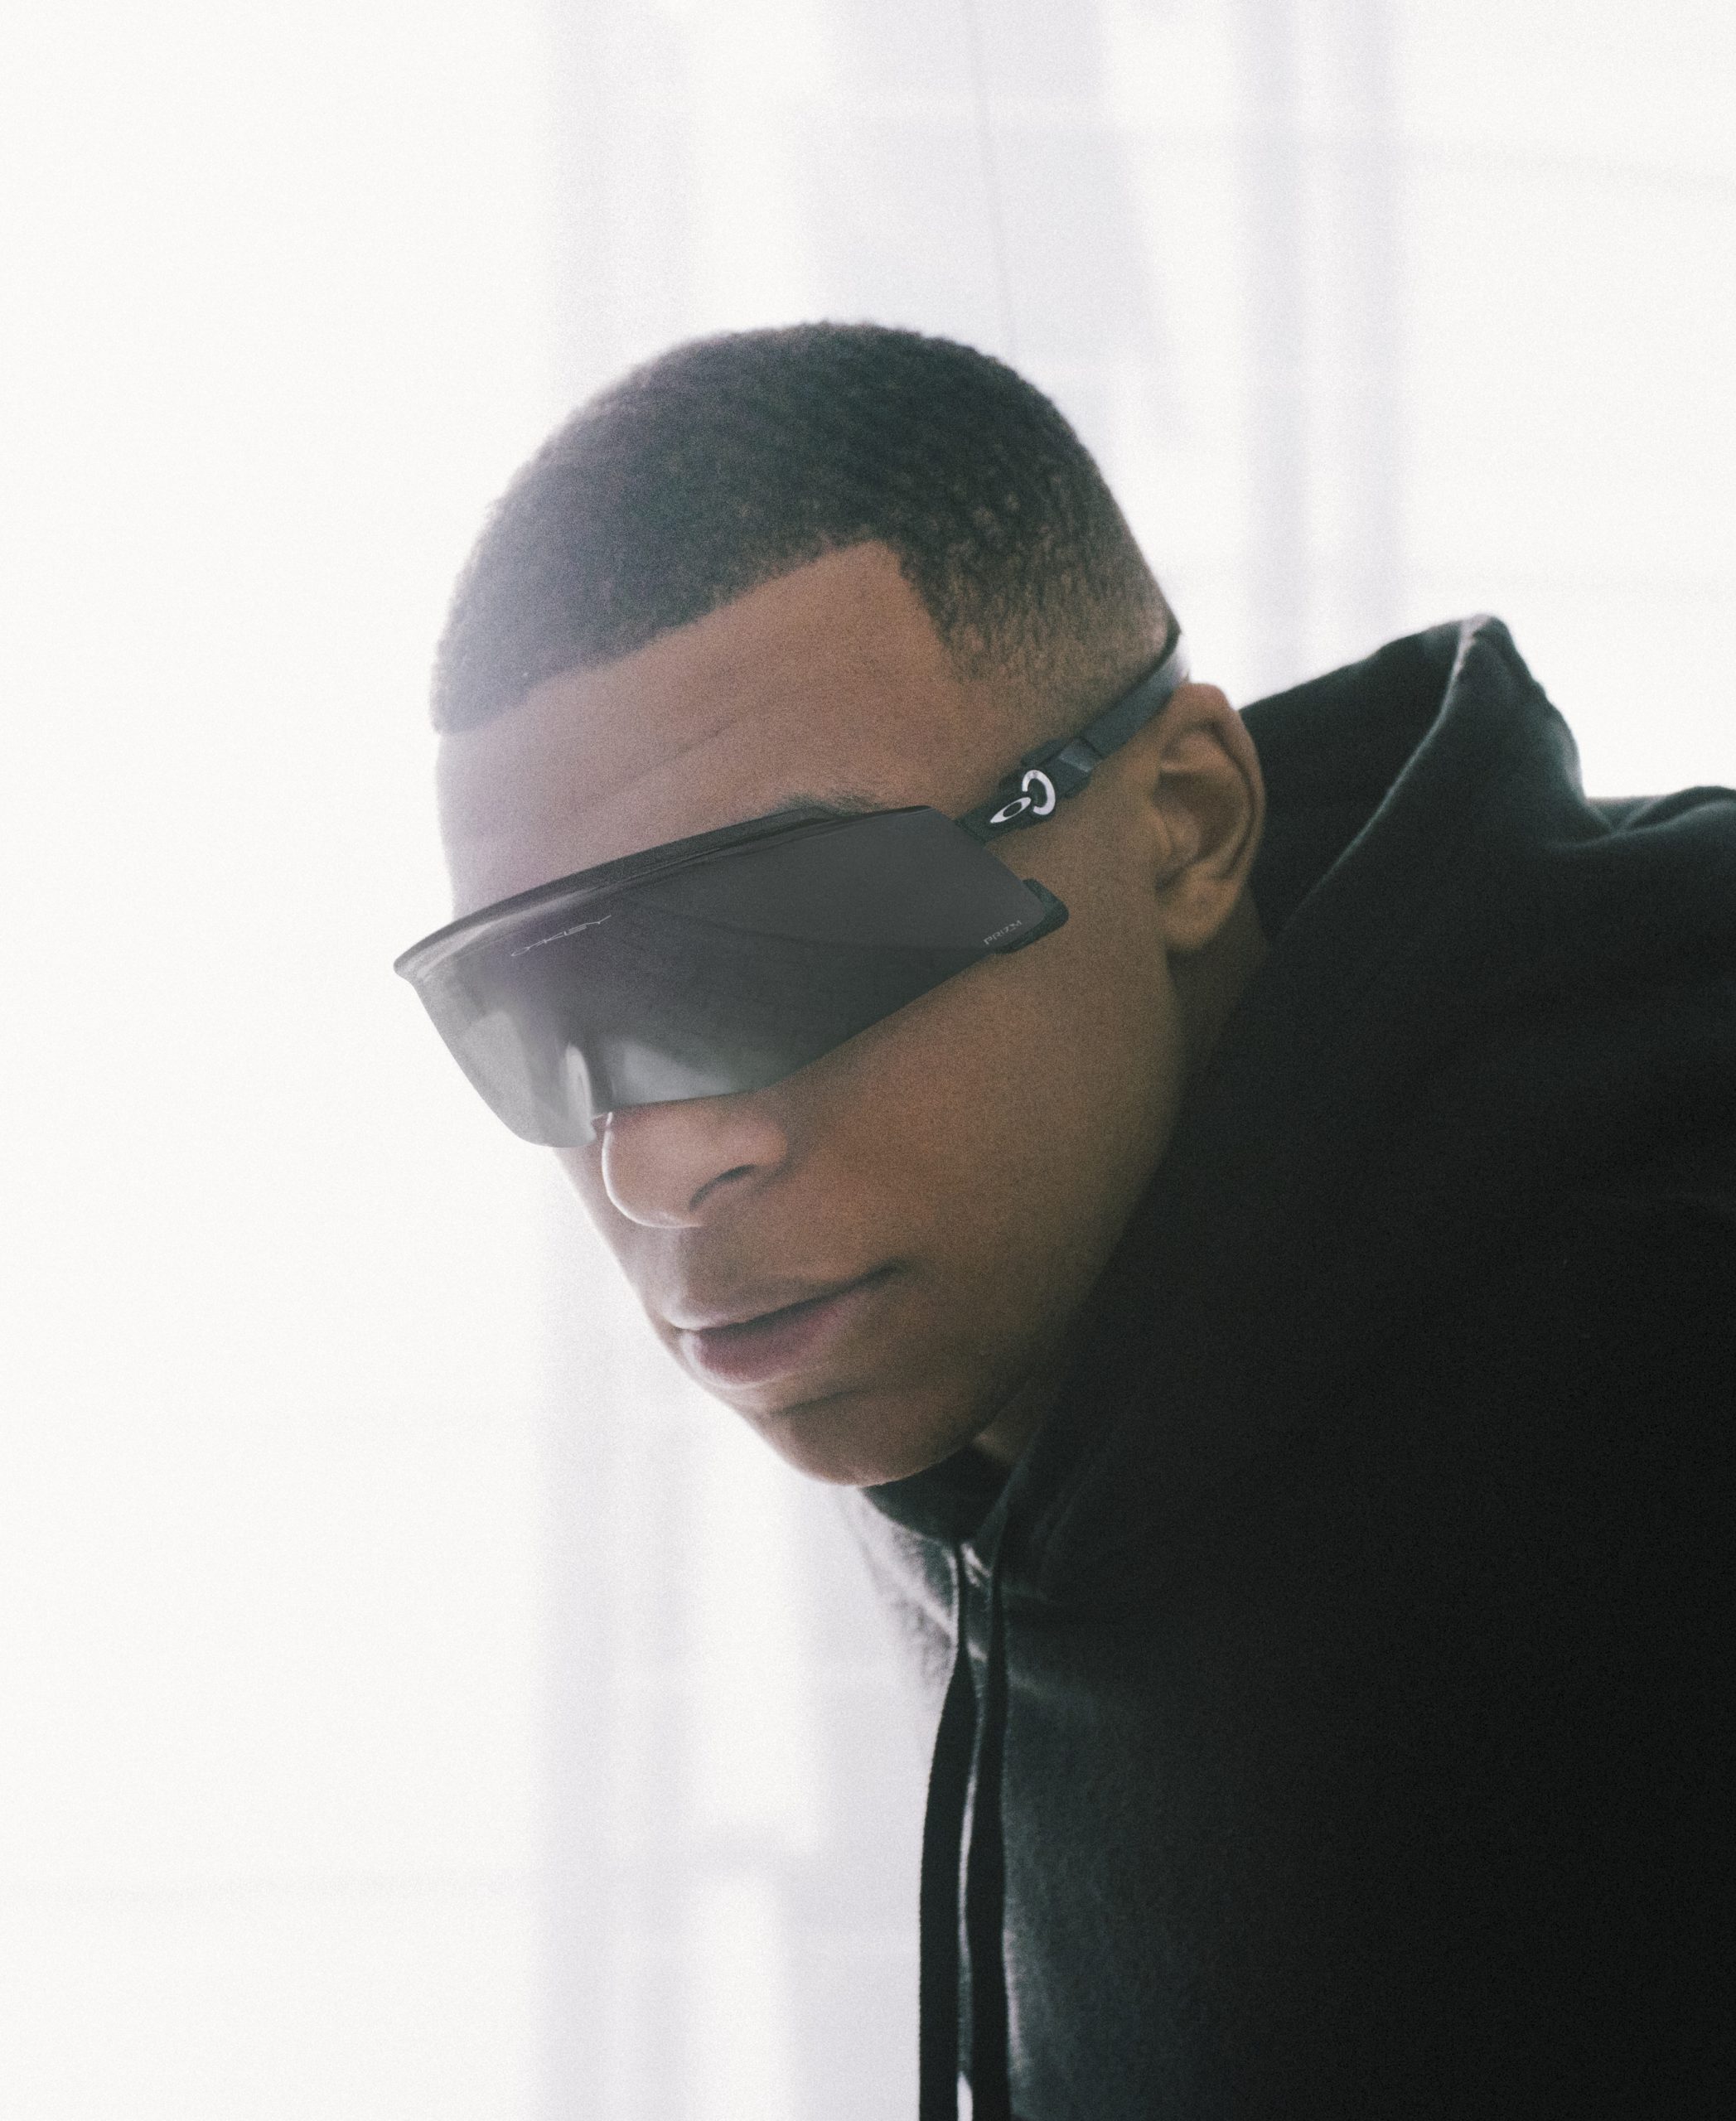 Shop CHANEL Sunglasses by MBAPPE